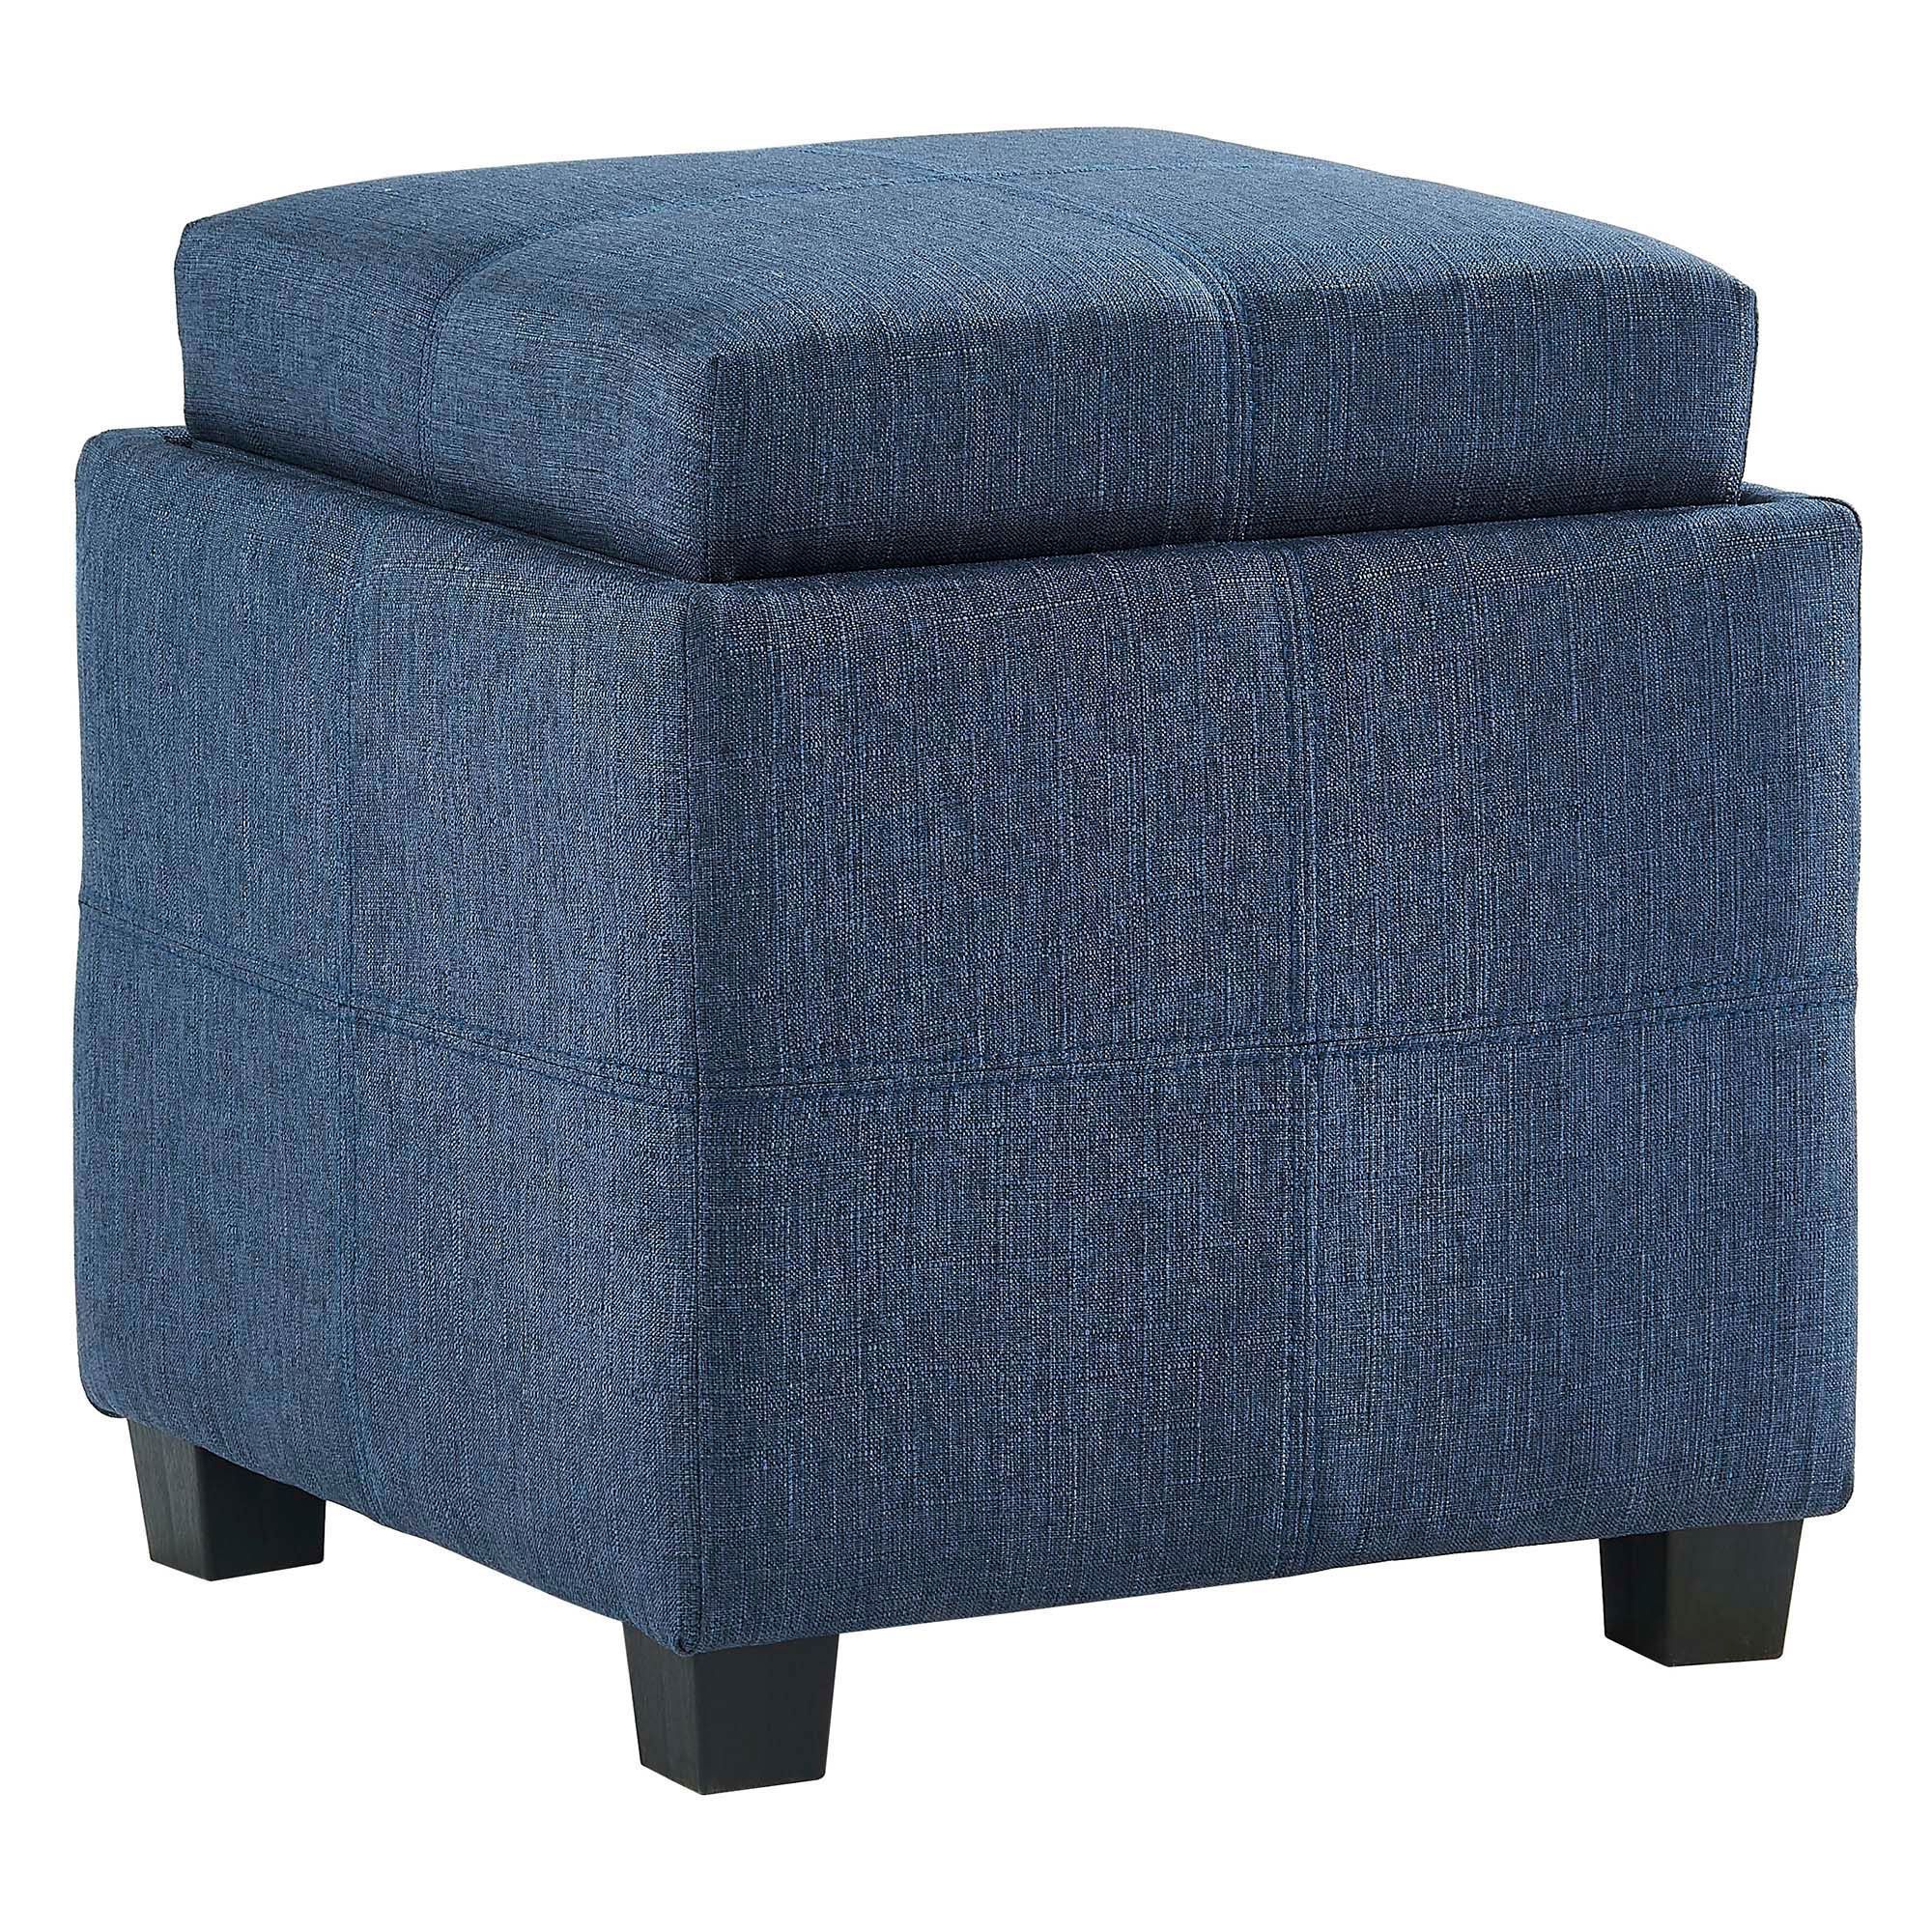 Recent 19" Blue And Gray Transitional Square Storage Ottoman With Reversible Regarding Square Cube Ottomans (View 3 of 10)